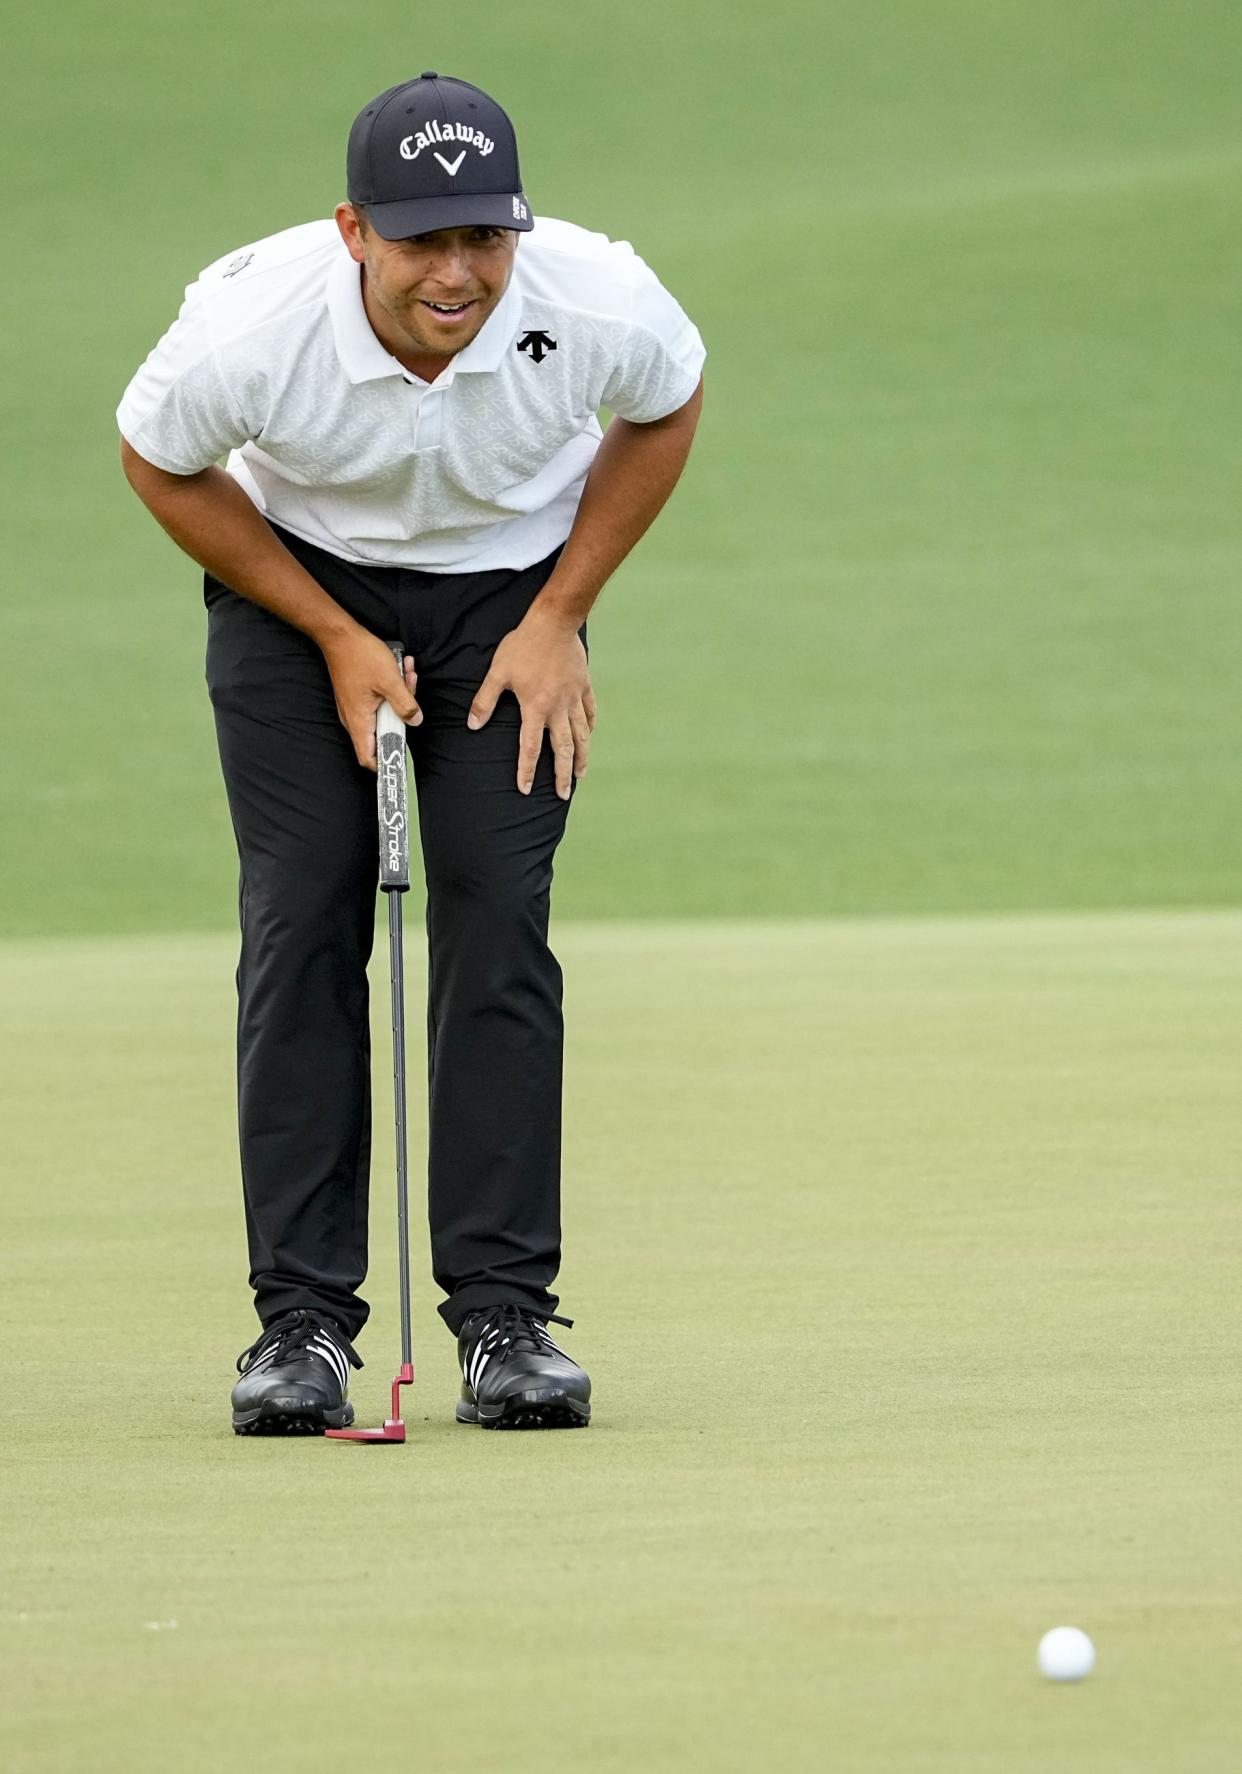 Xander Schauffele lines up a putt on No. 2 early in his round Thursday.